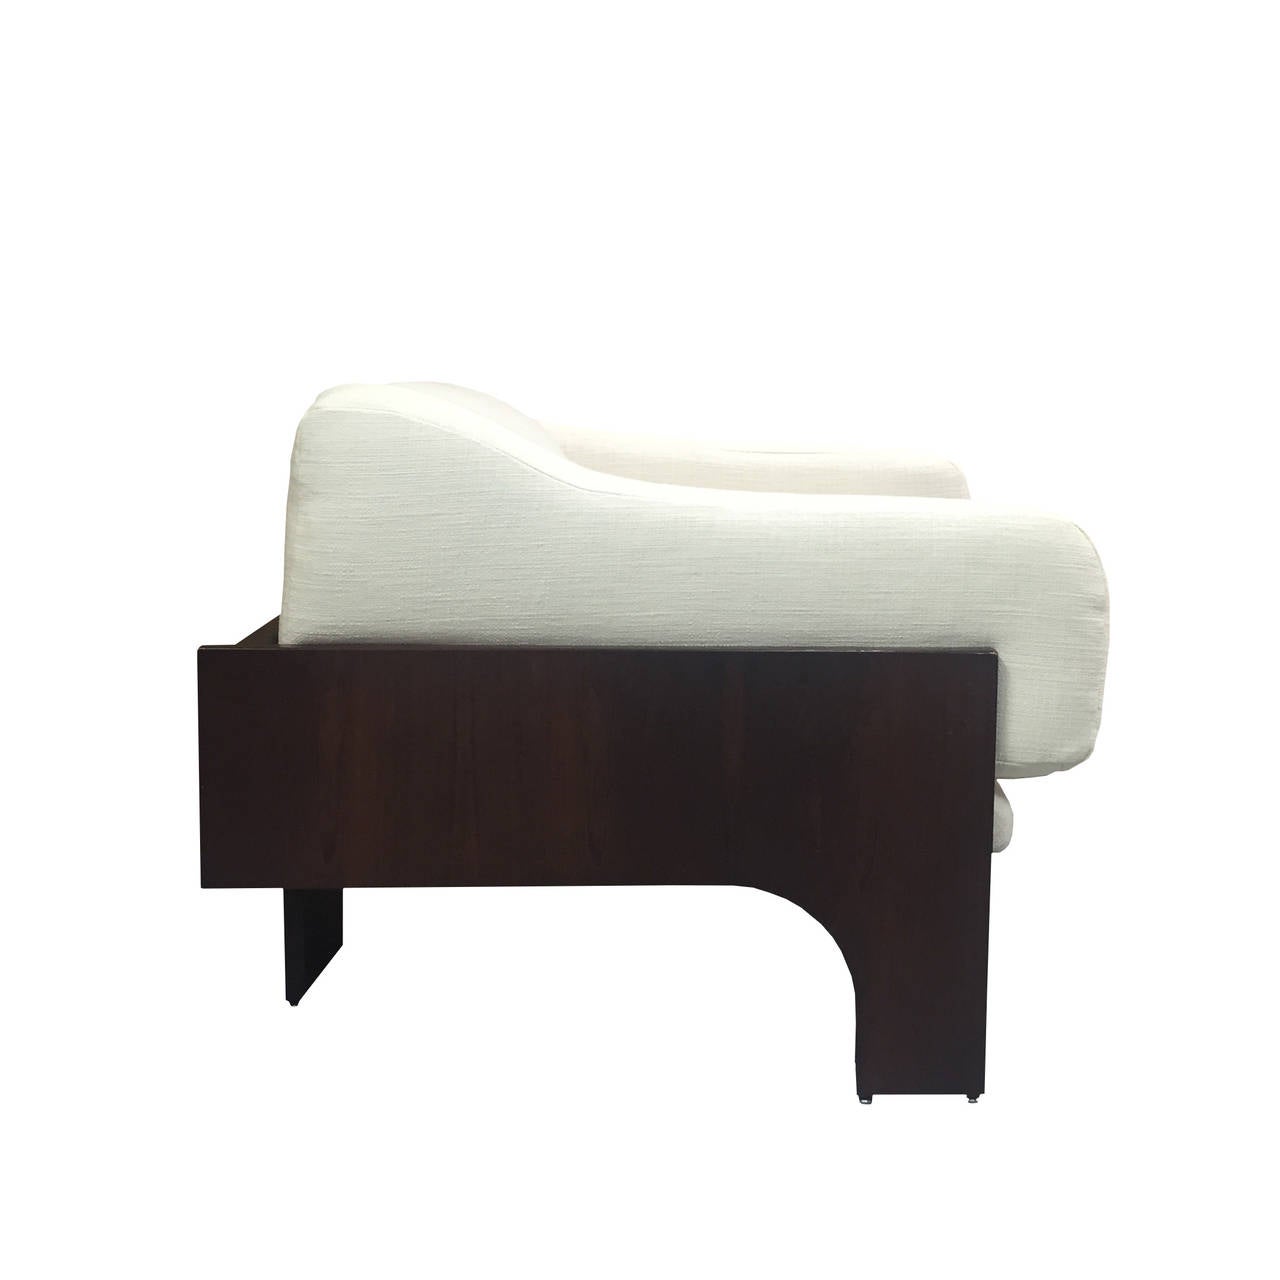 Claudio Salocchi for Sormani rosewood chair in white upholstery. 

Pair available, sold individually.